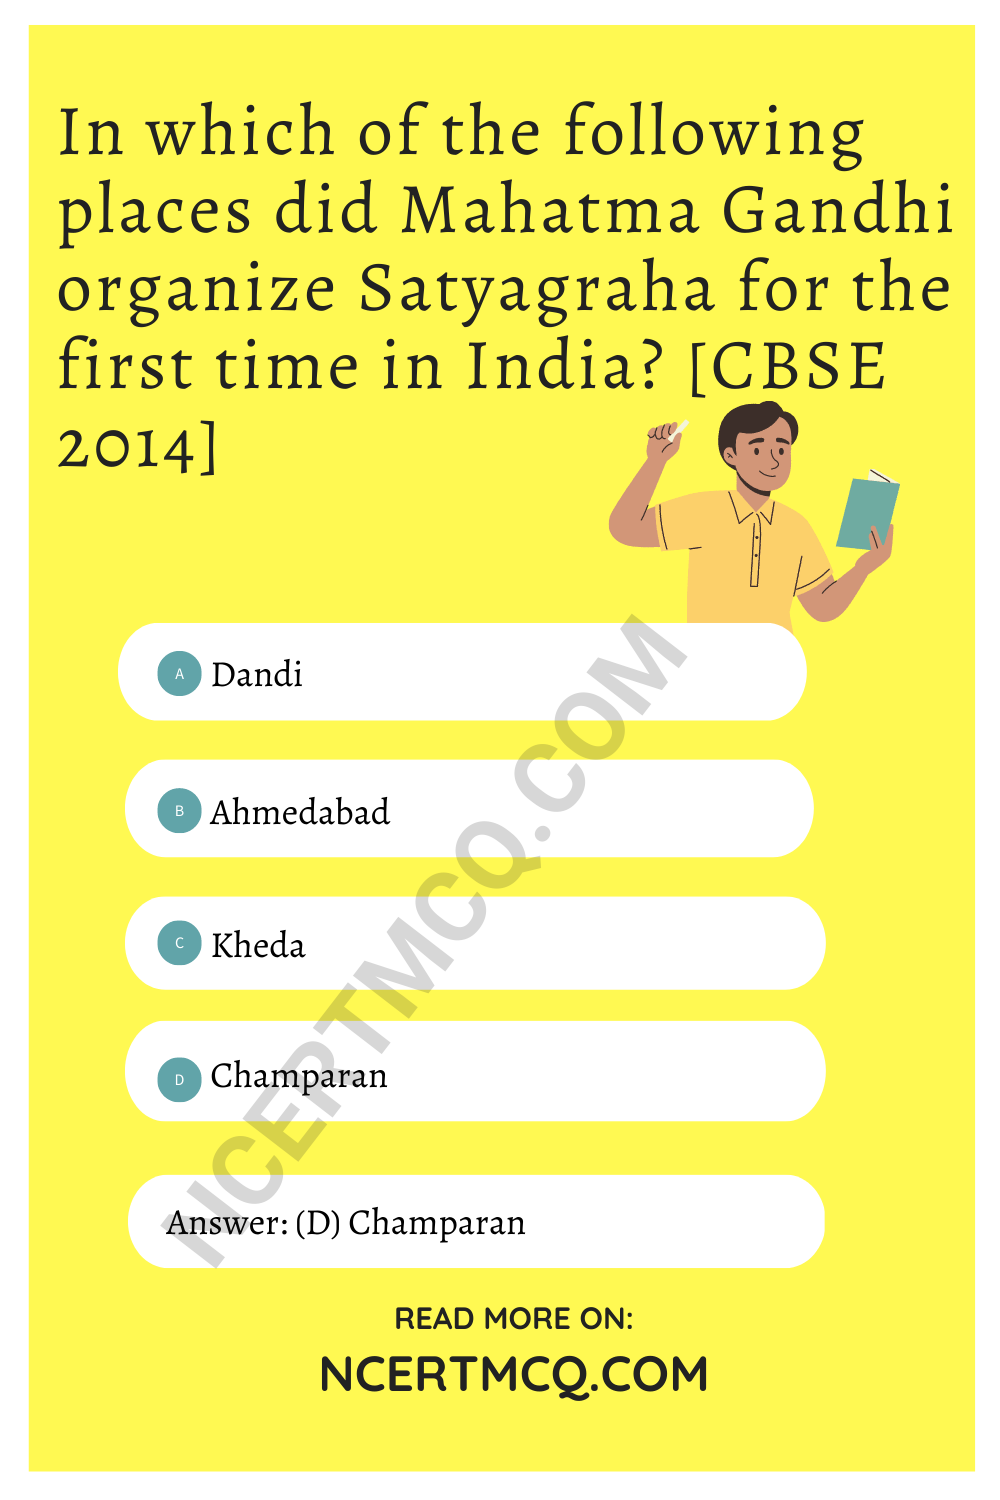 In which of the following places did Mahatma Gandhi organize Satyagraha for the first time in India? [CBSE 2014]